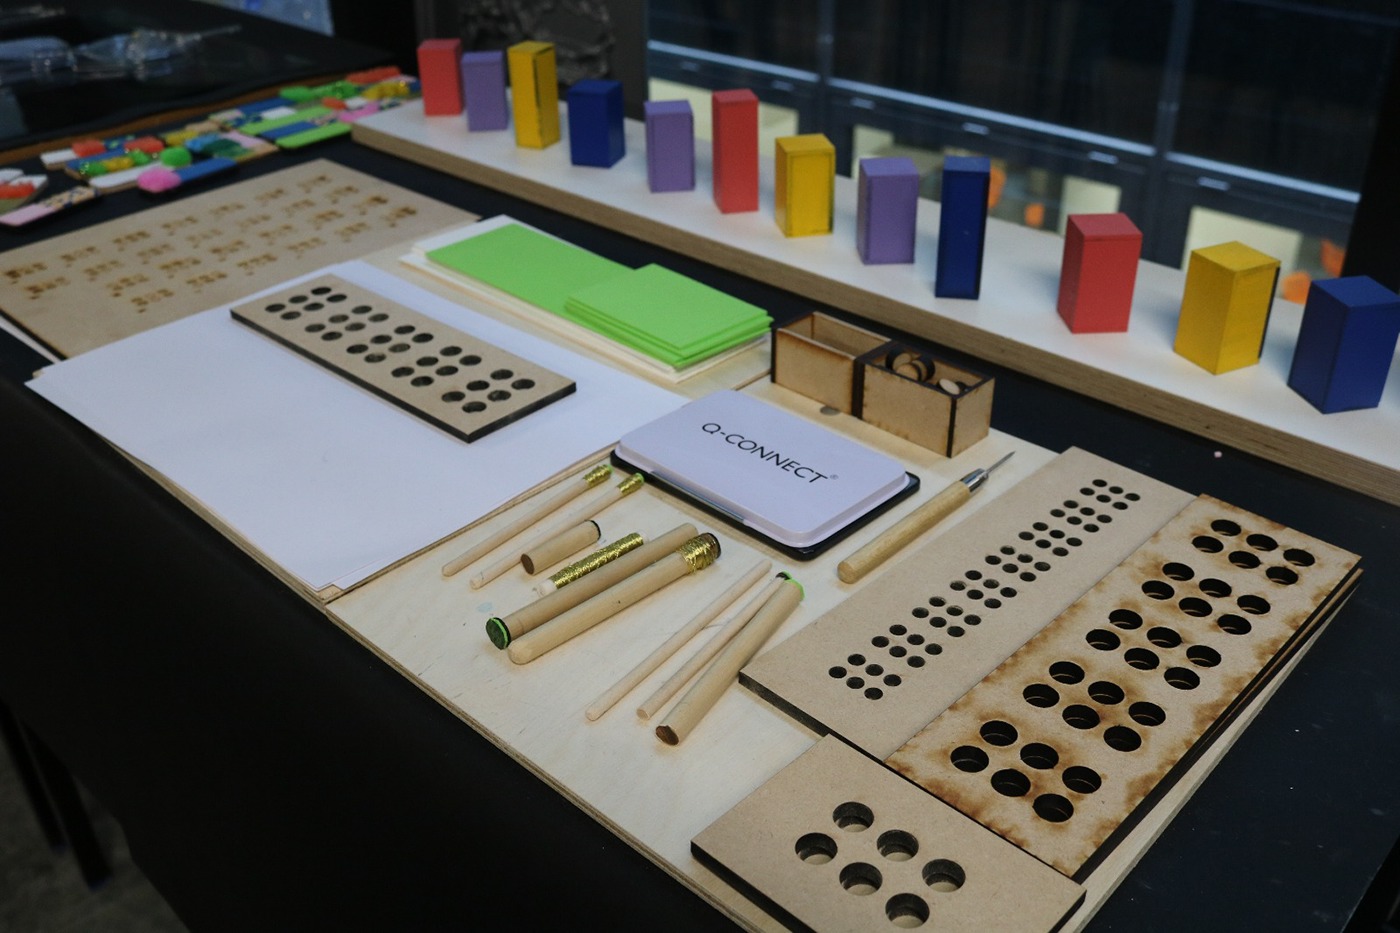 Braille Visual impairment interaction text laser cut Protoype wood